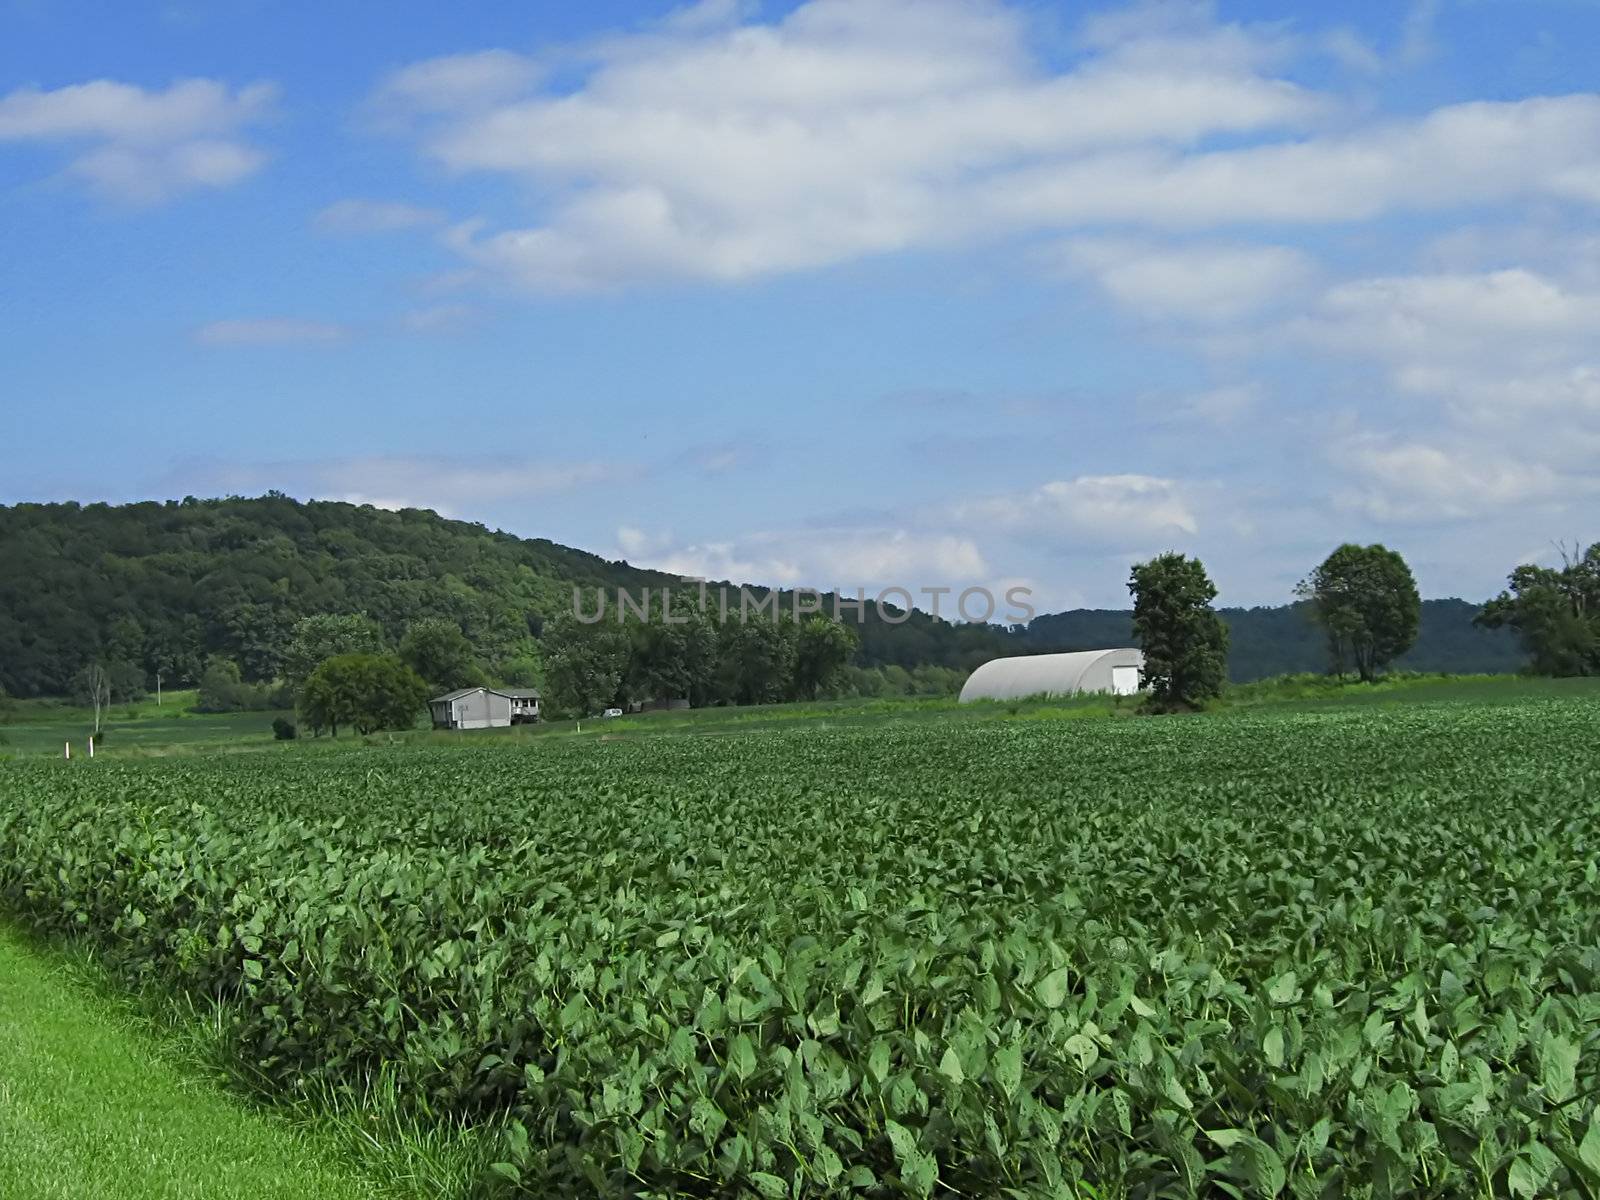 A photograph of a field of crops.